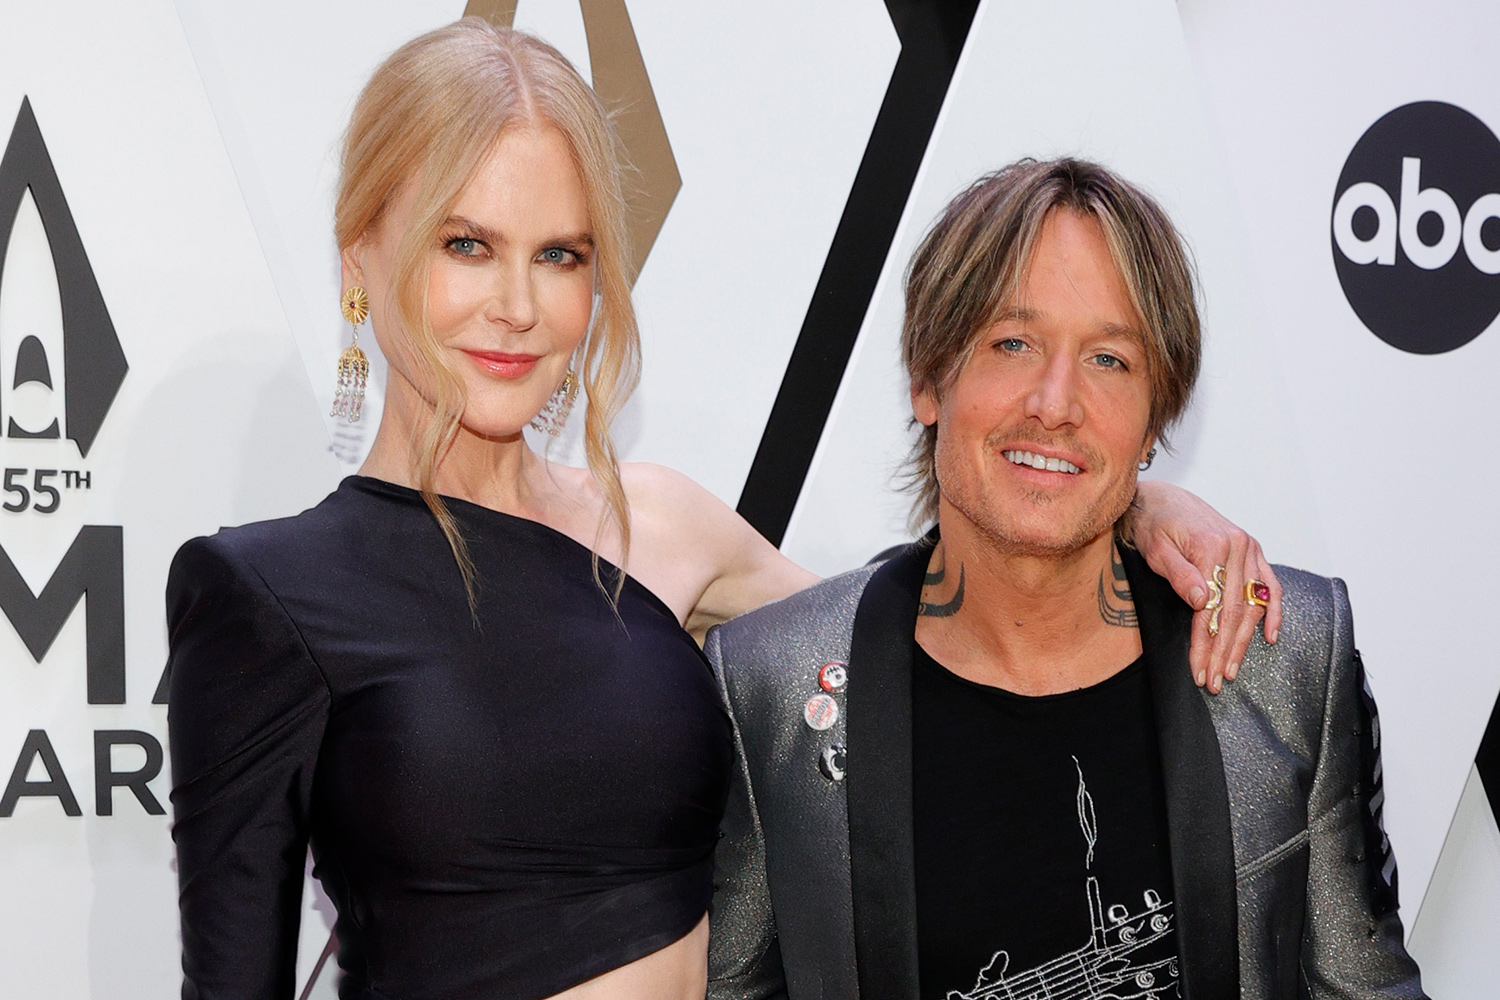 NASHVILLE, TENNESSEE - NOVEMBER 10: Nicole Kidman and Keith Urban attend the 55th annual Country Music Association awards at the Bridgestone Arena on November 10, 2021 in Nashville, Tennessee. (Photo by Jason Kempin/Getty Images)